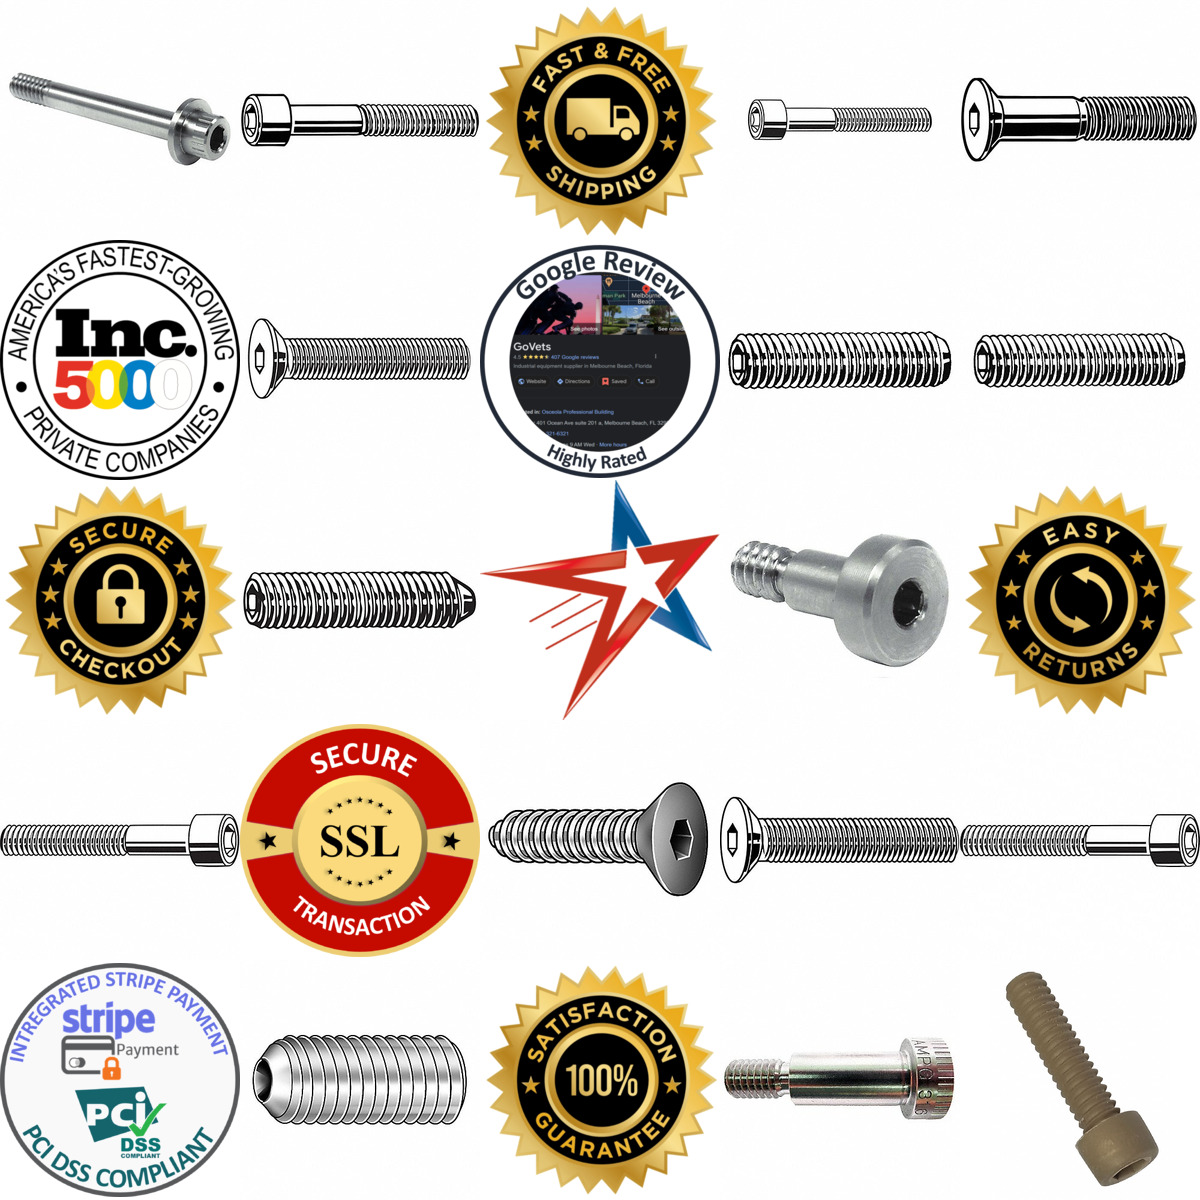 A selection of Socket Screws and Set Screws products on GoVets